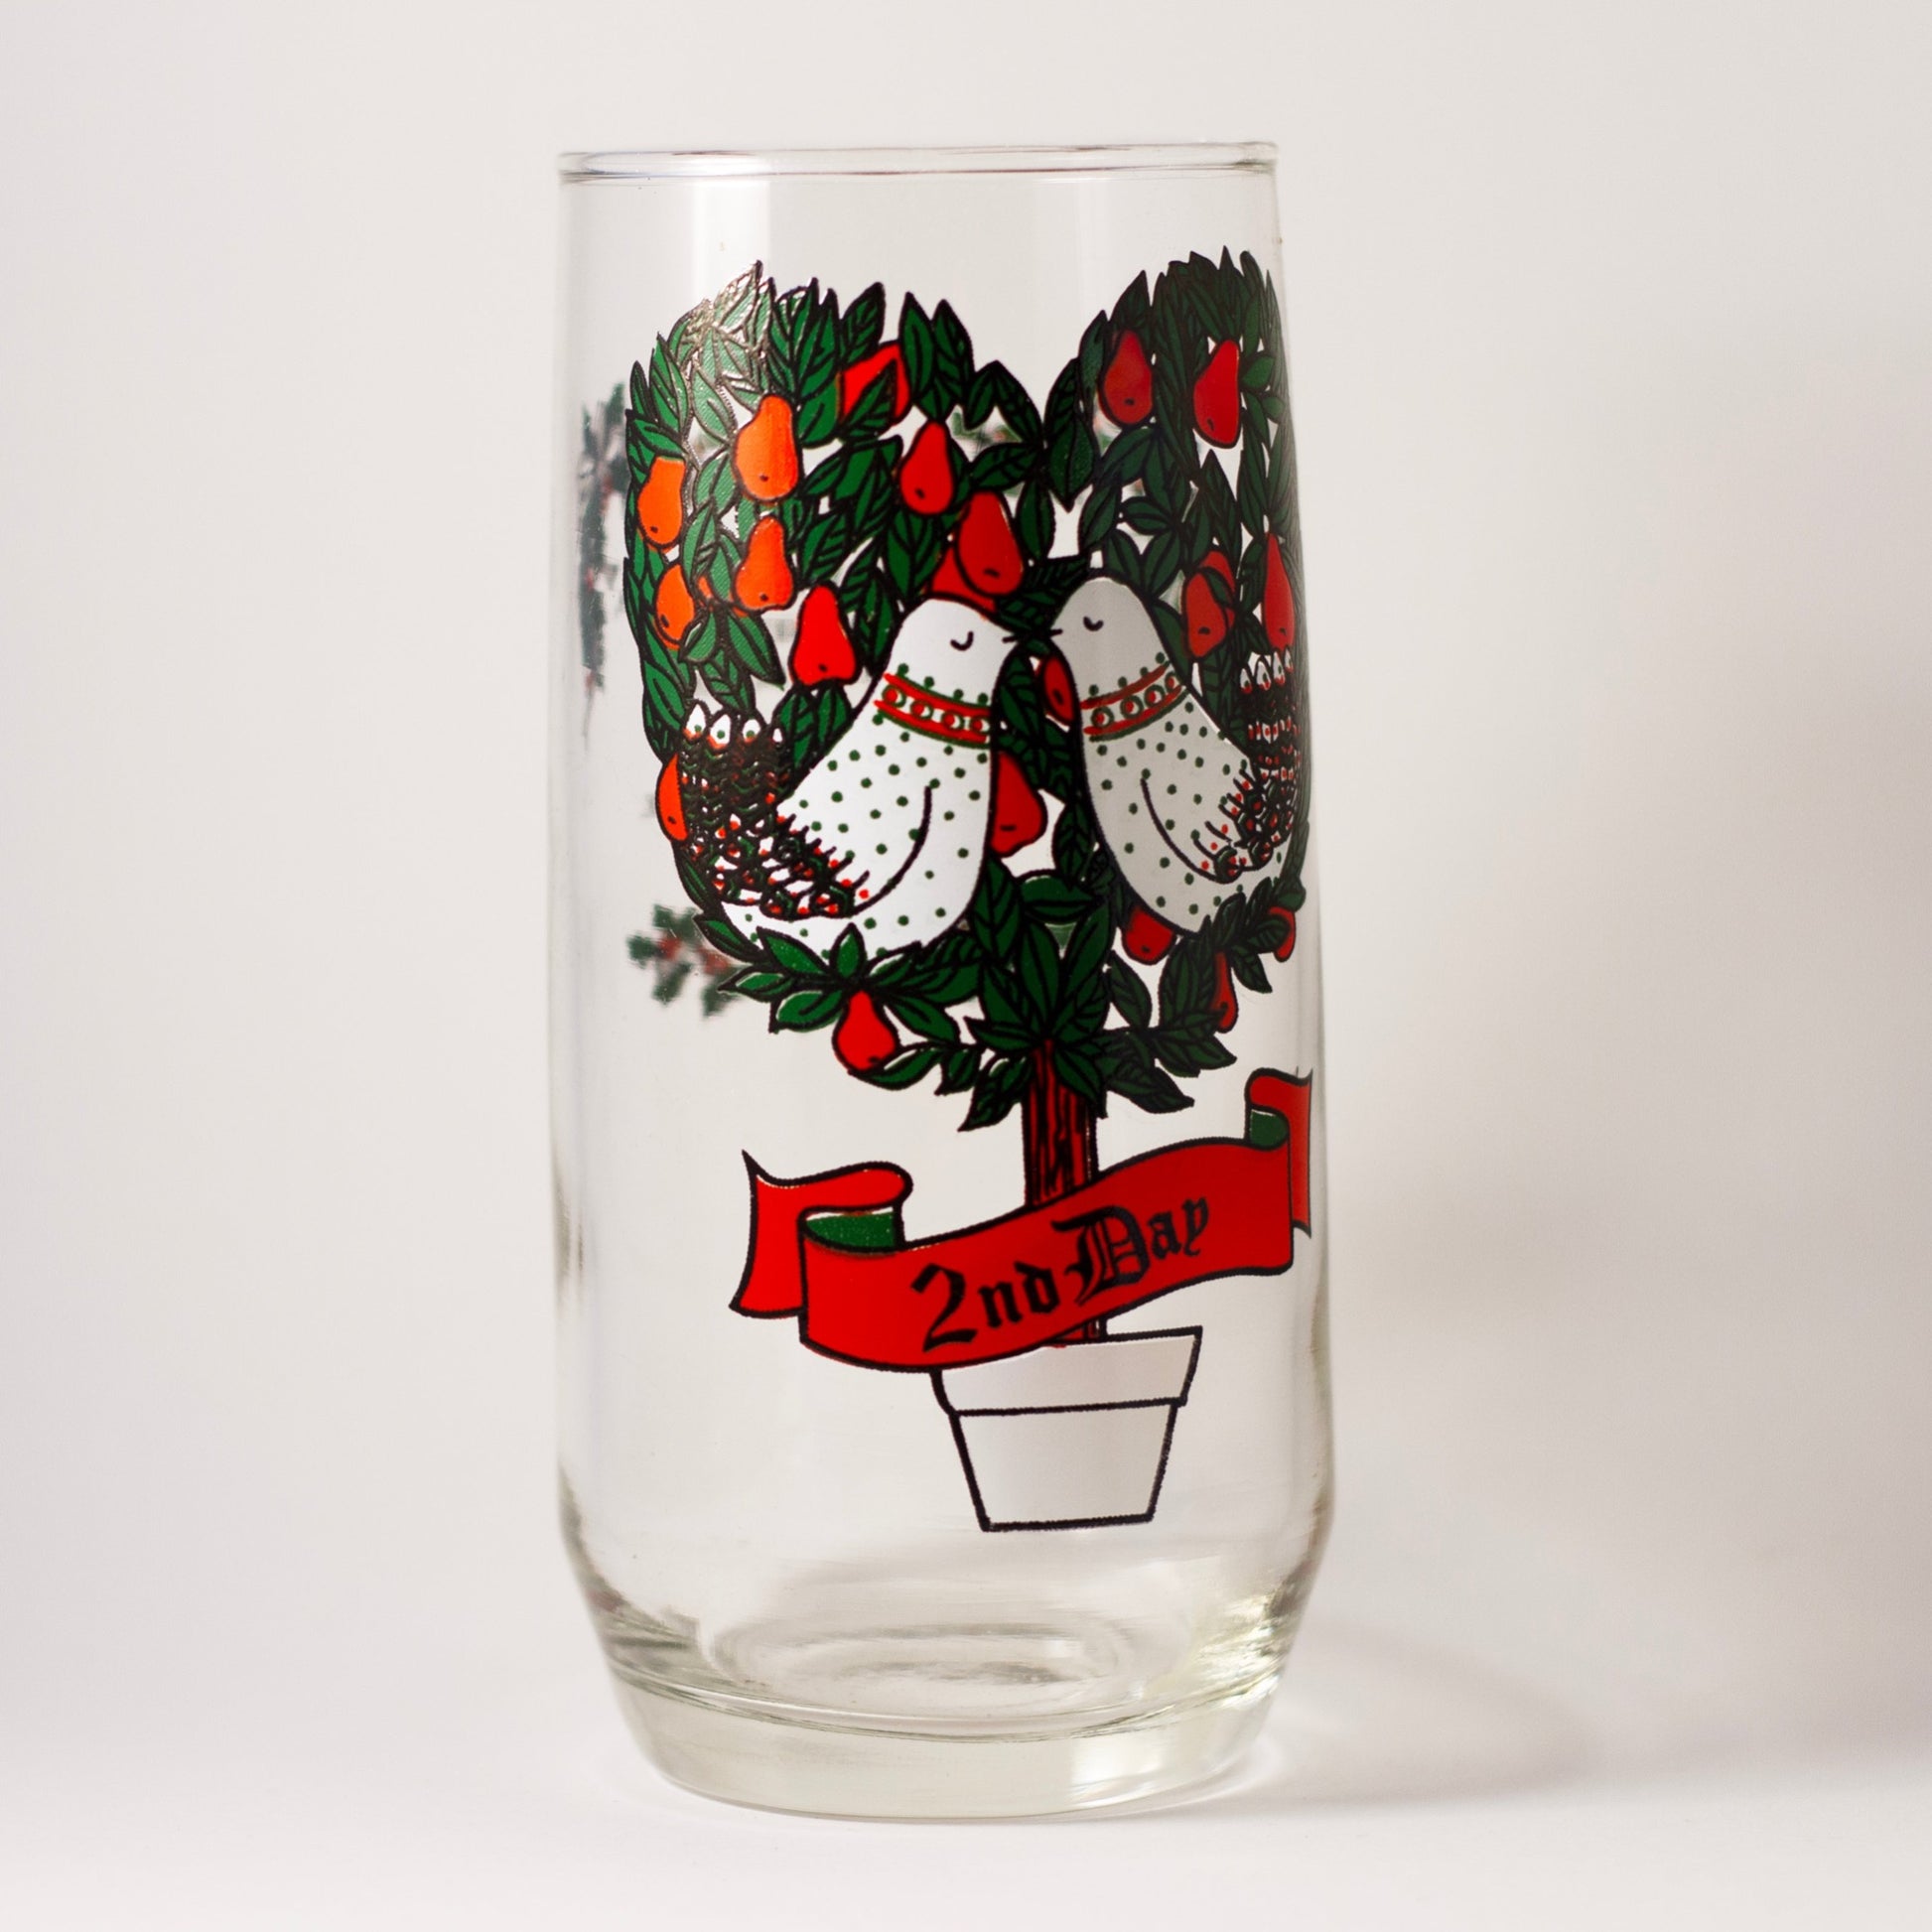 Whimsical 2nd Day of the TWELVE DAYS OF CHRISTMAS Glass 